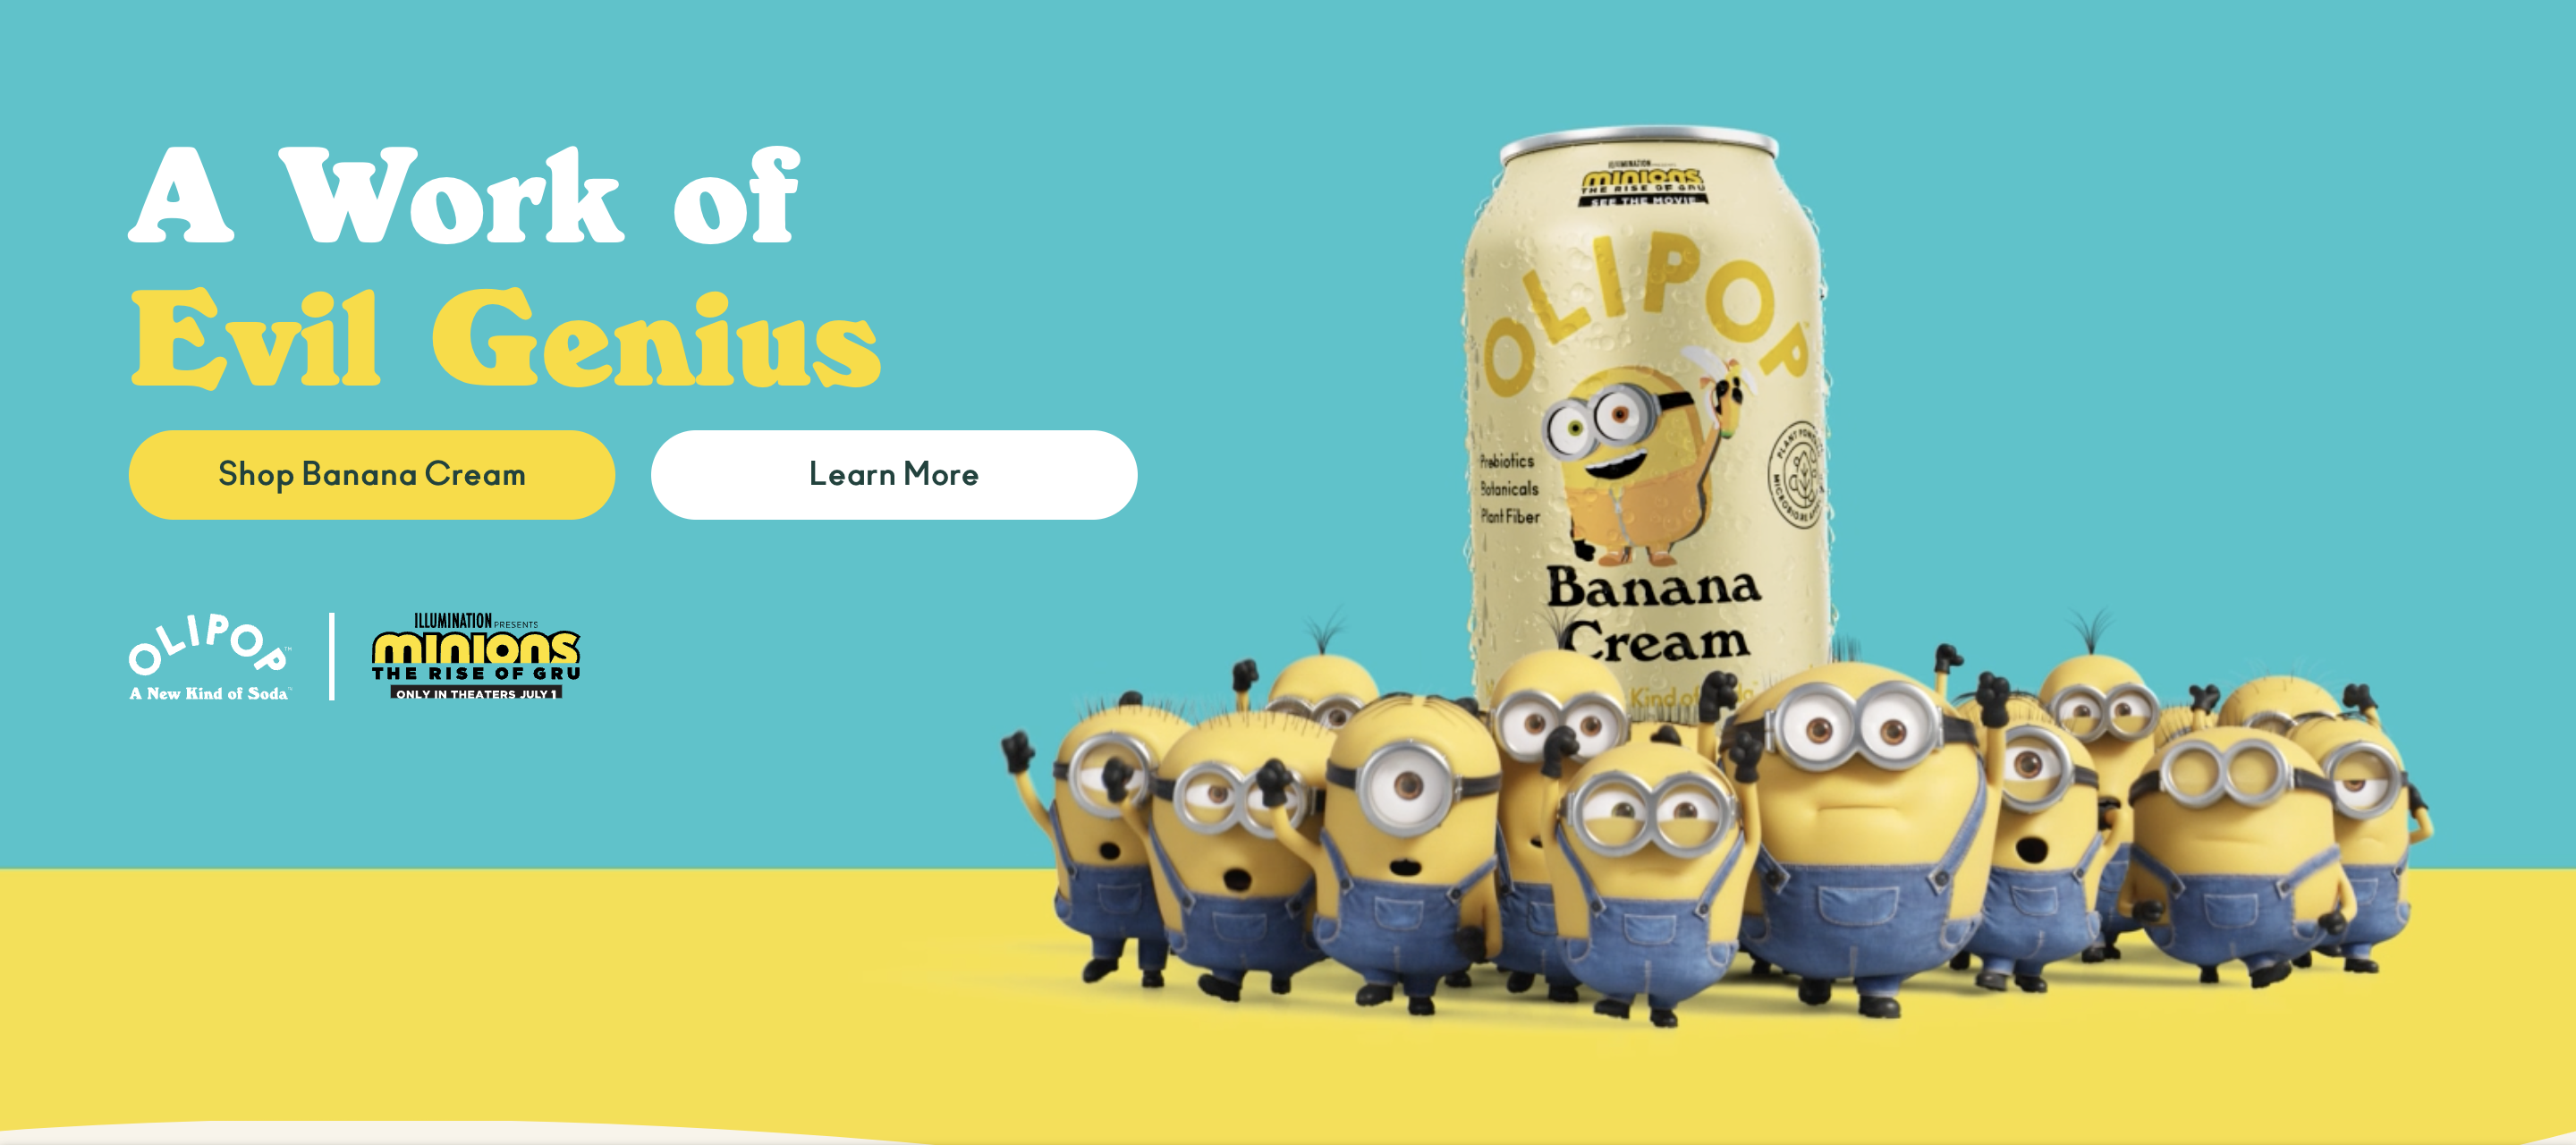 Minions and Olipop brand collaboration